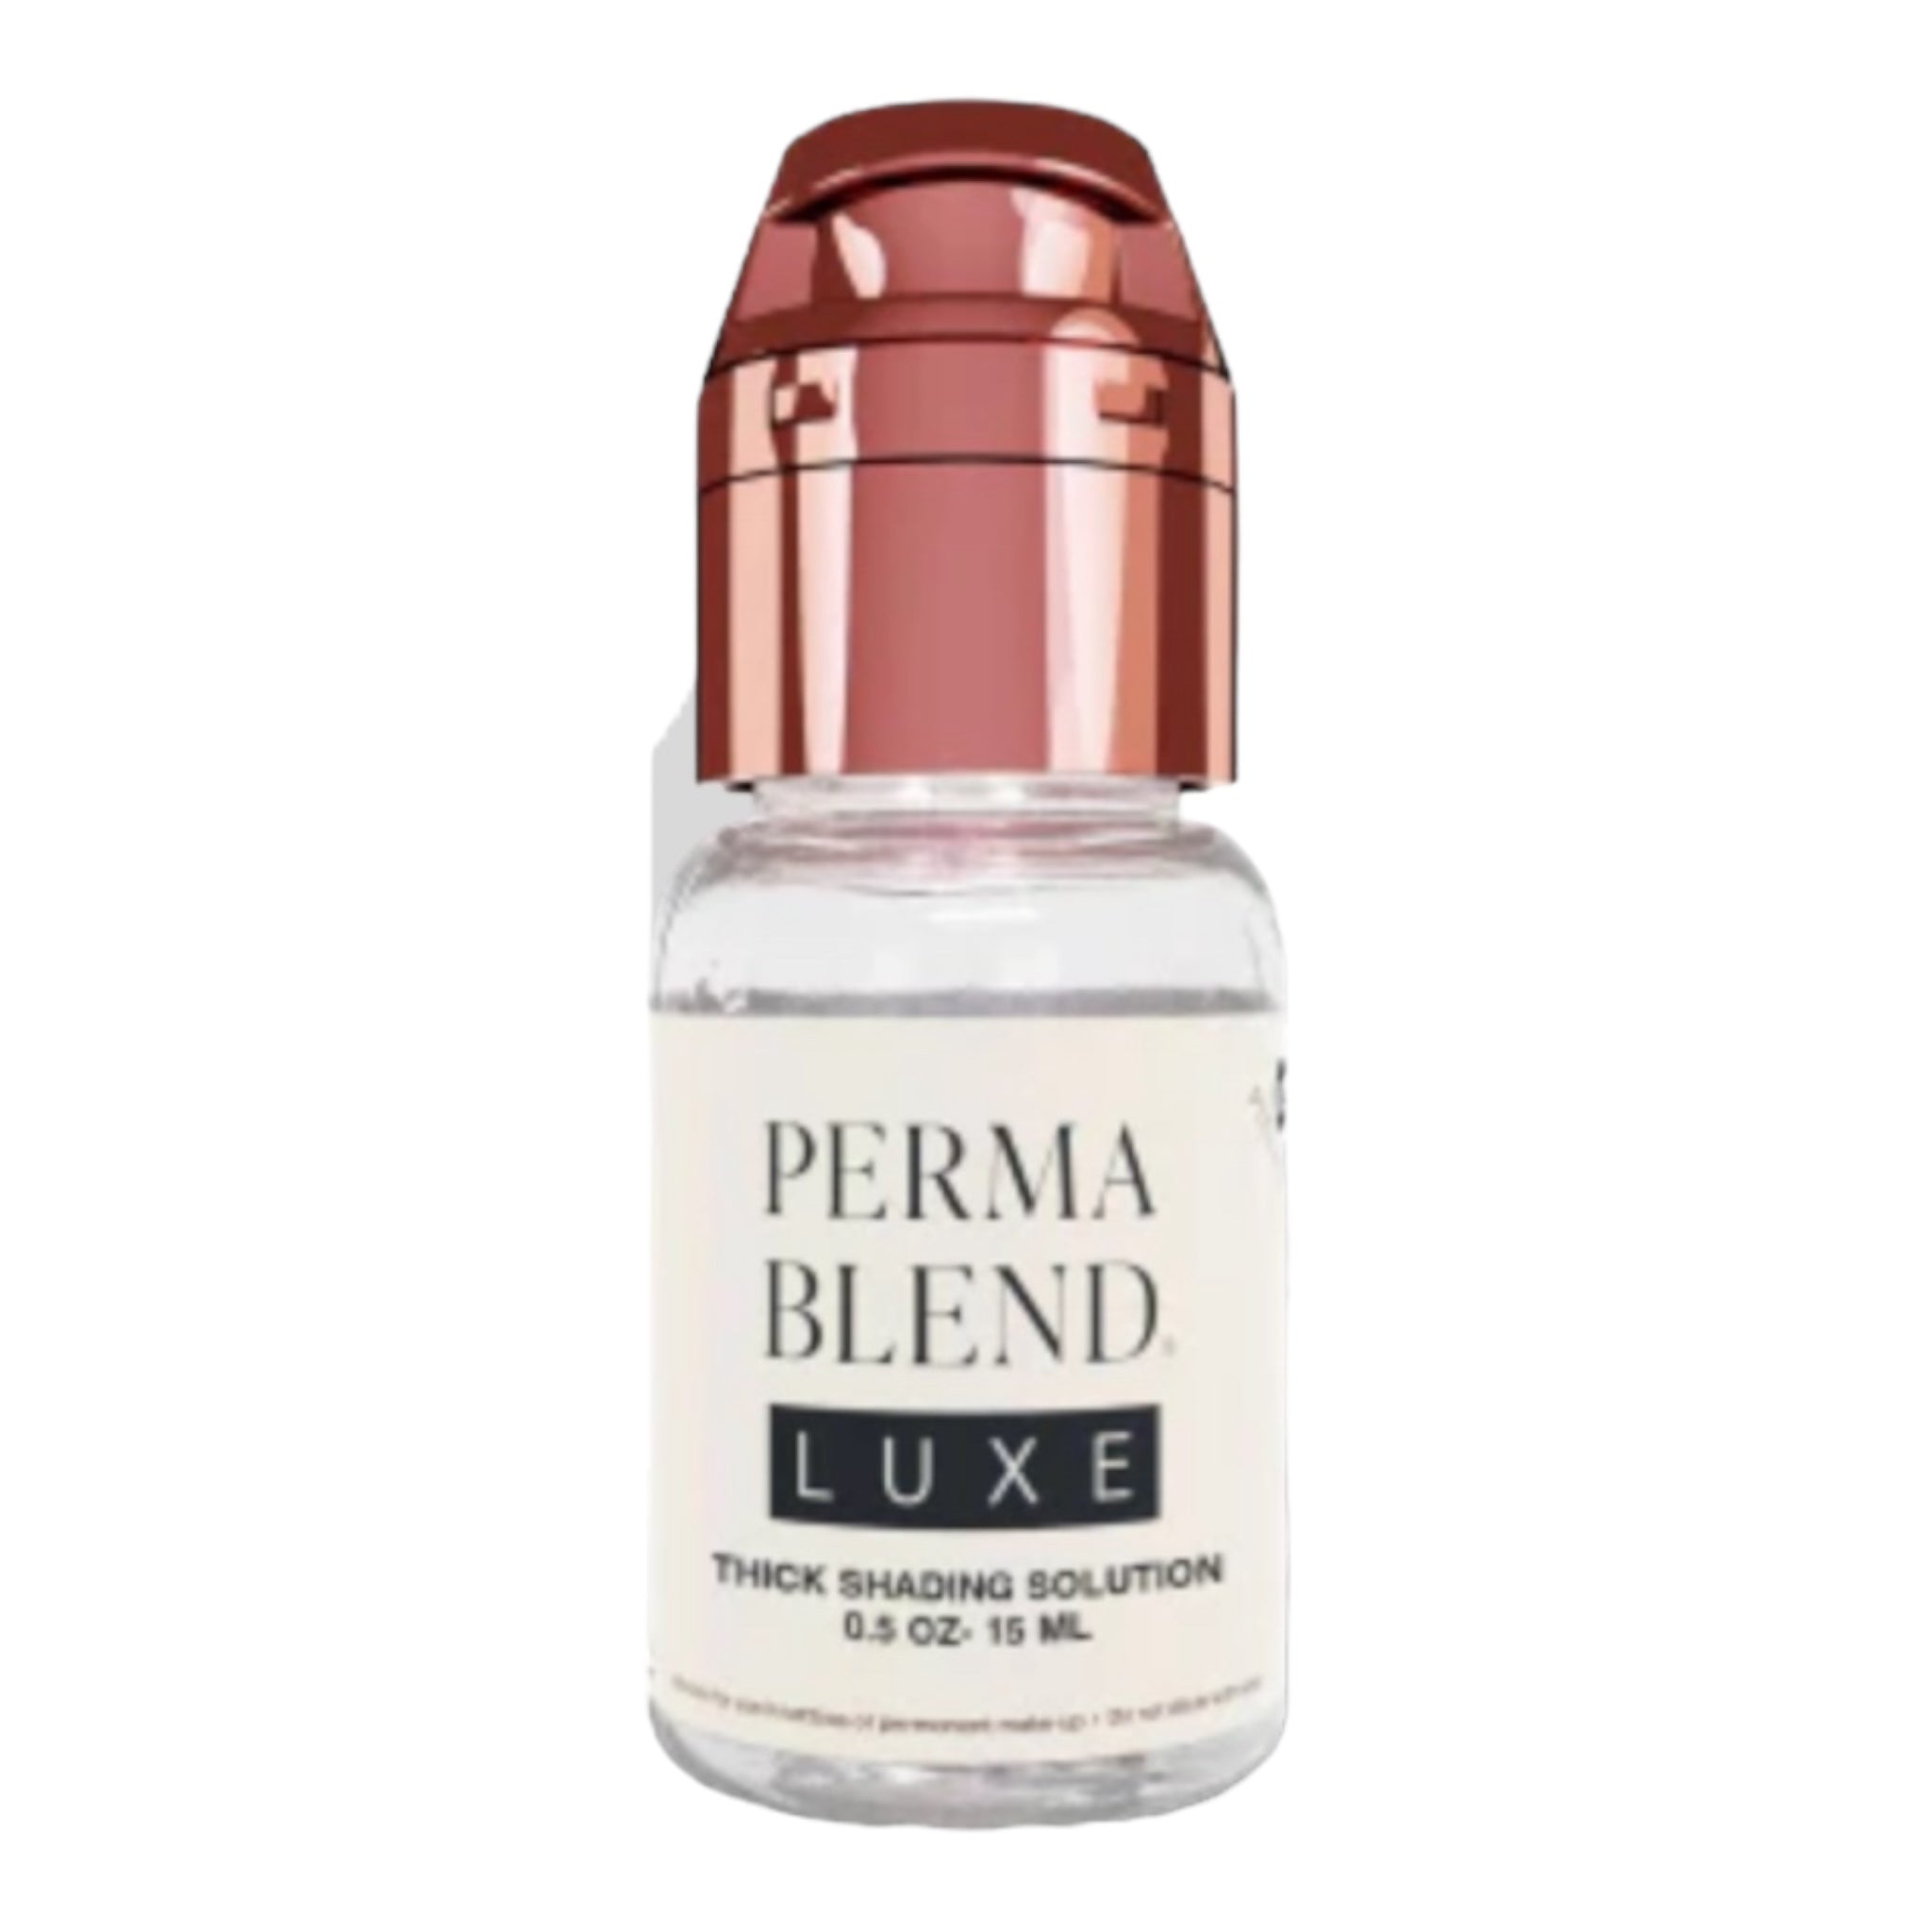 Encre Maquillage Perma Blend Luxe 15ml -Shading solution